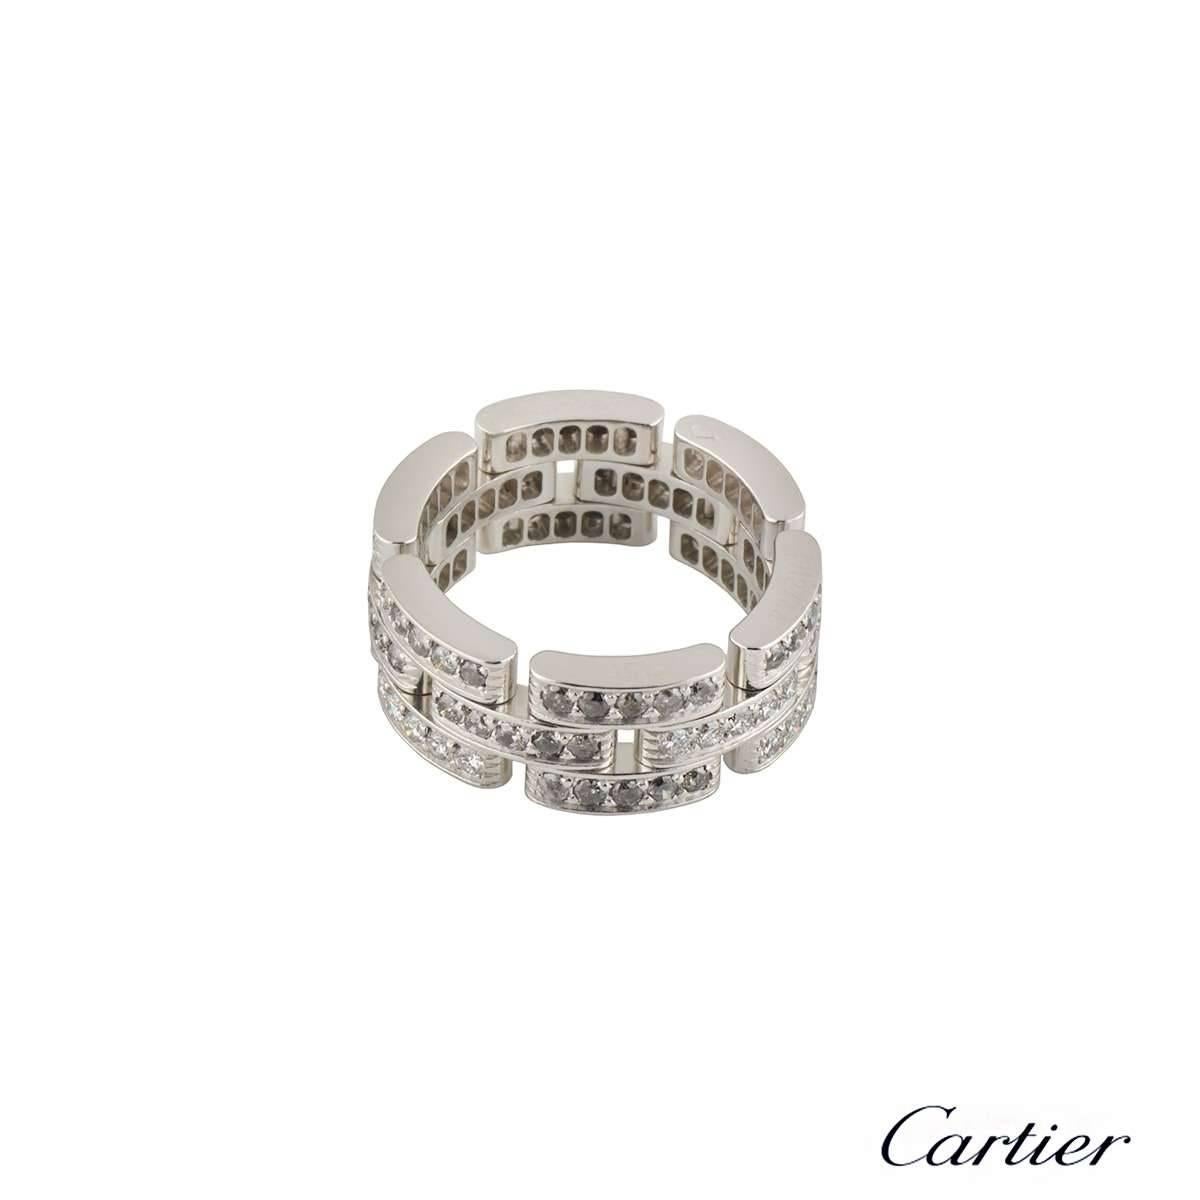 A stunning 18k white gold Cartier diamond Maillon Panthere ring from the Links and Chain collection. The ring comprises of 3 rows of 18 open work flexible panels, each panel is pave set with five round brilliant cut diamonds totalling approximately